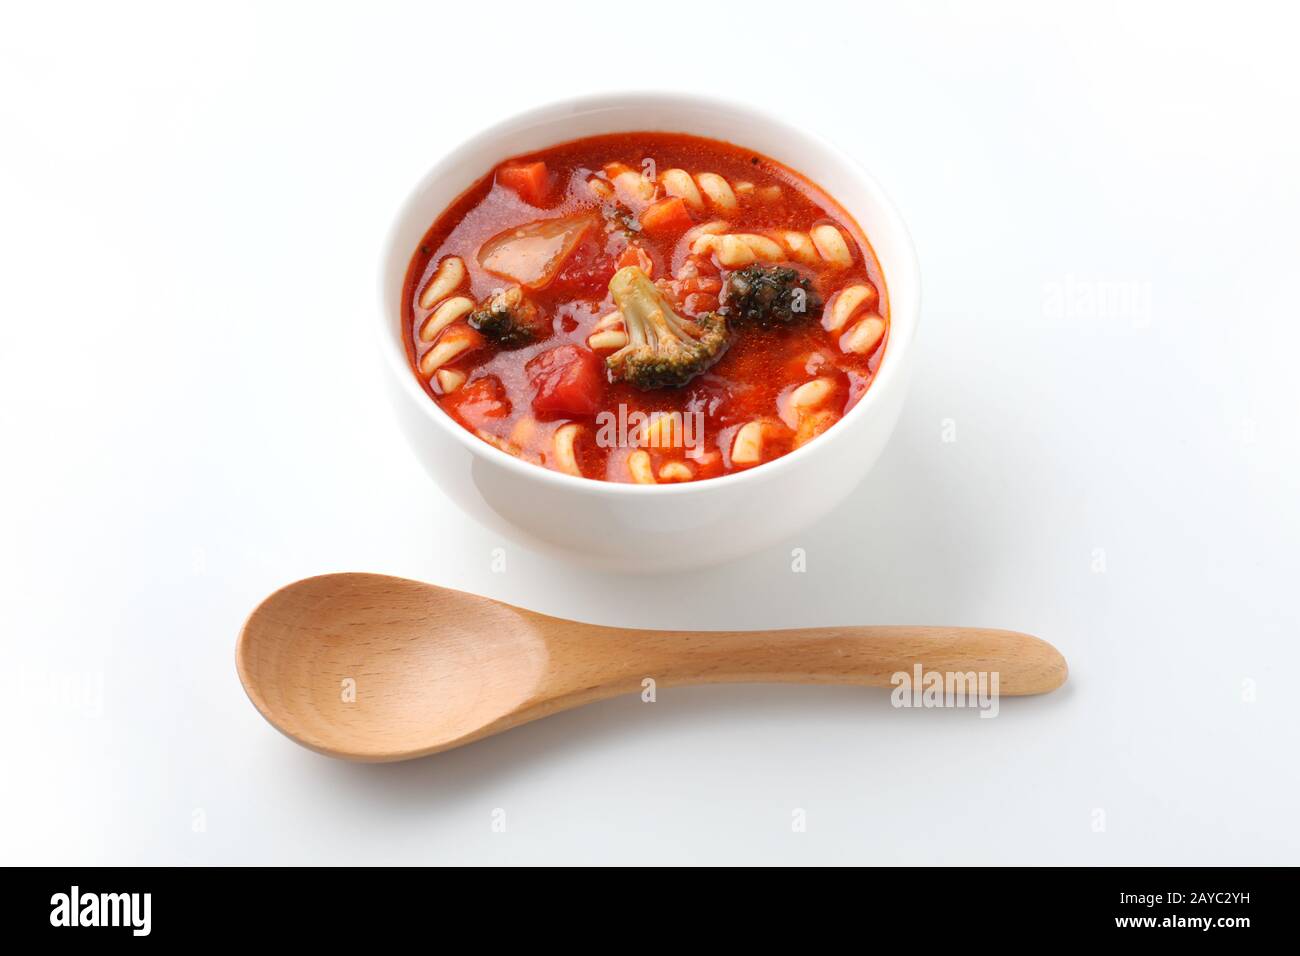 minestrone vegetables tomato soup with pasta closeup isolated on white background Stock Photo